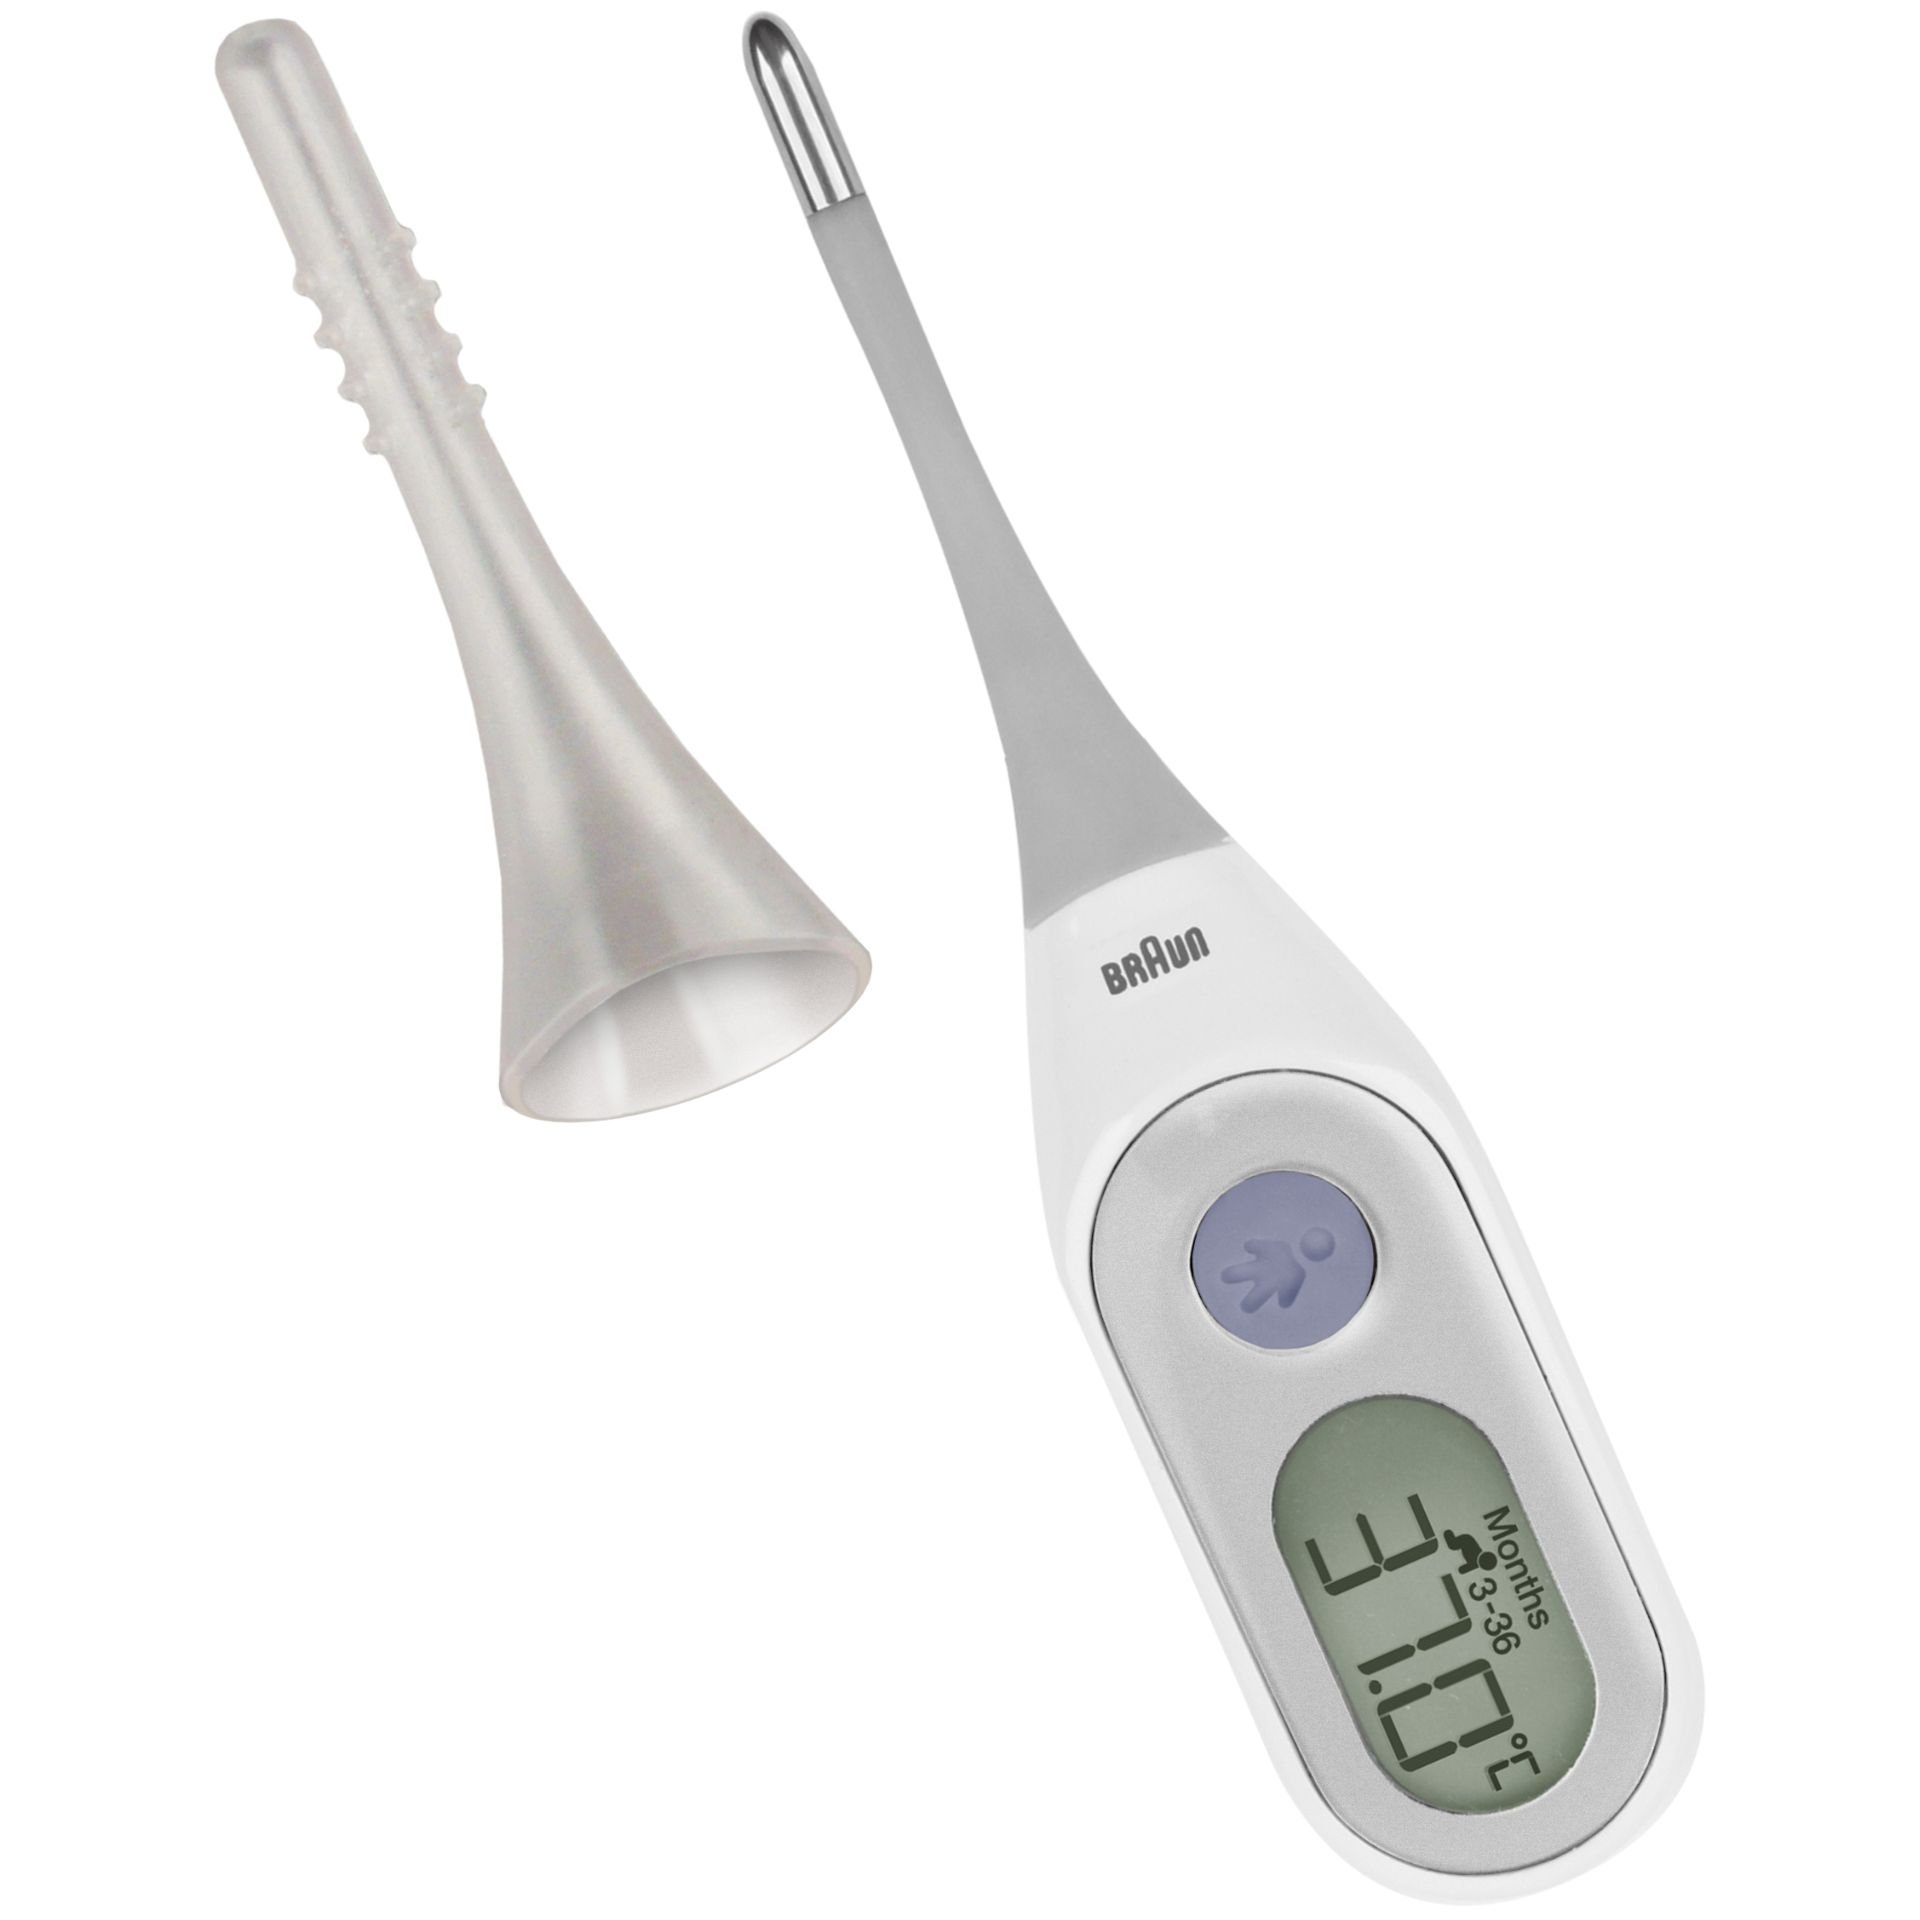 Braun clinical thermometer Age Precision PRT2000